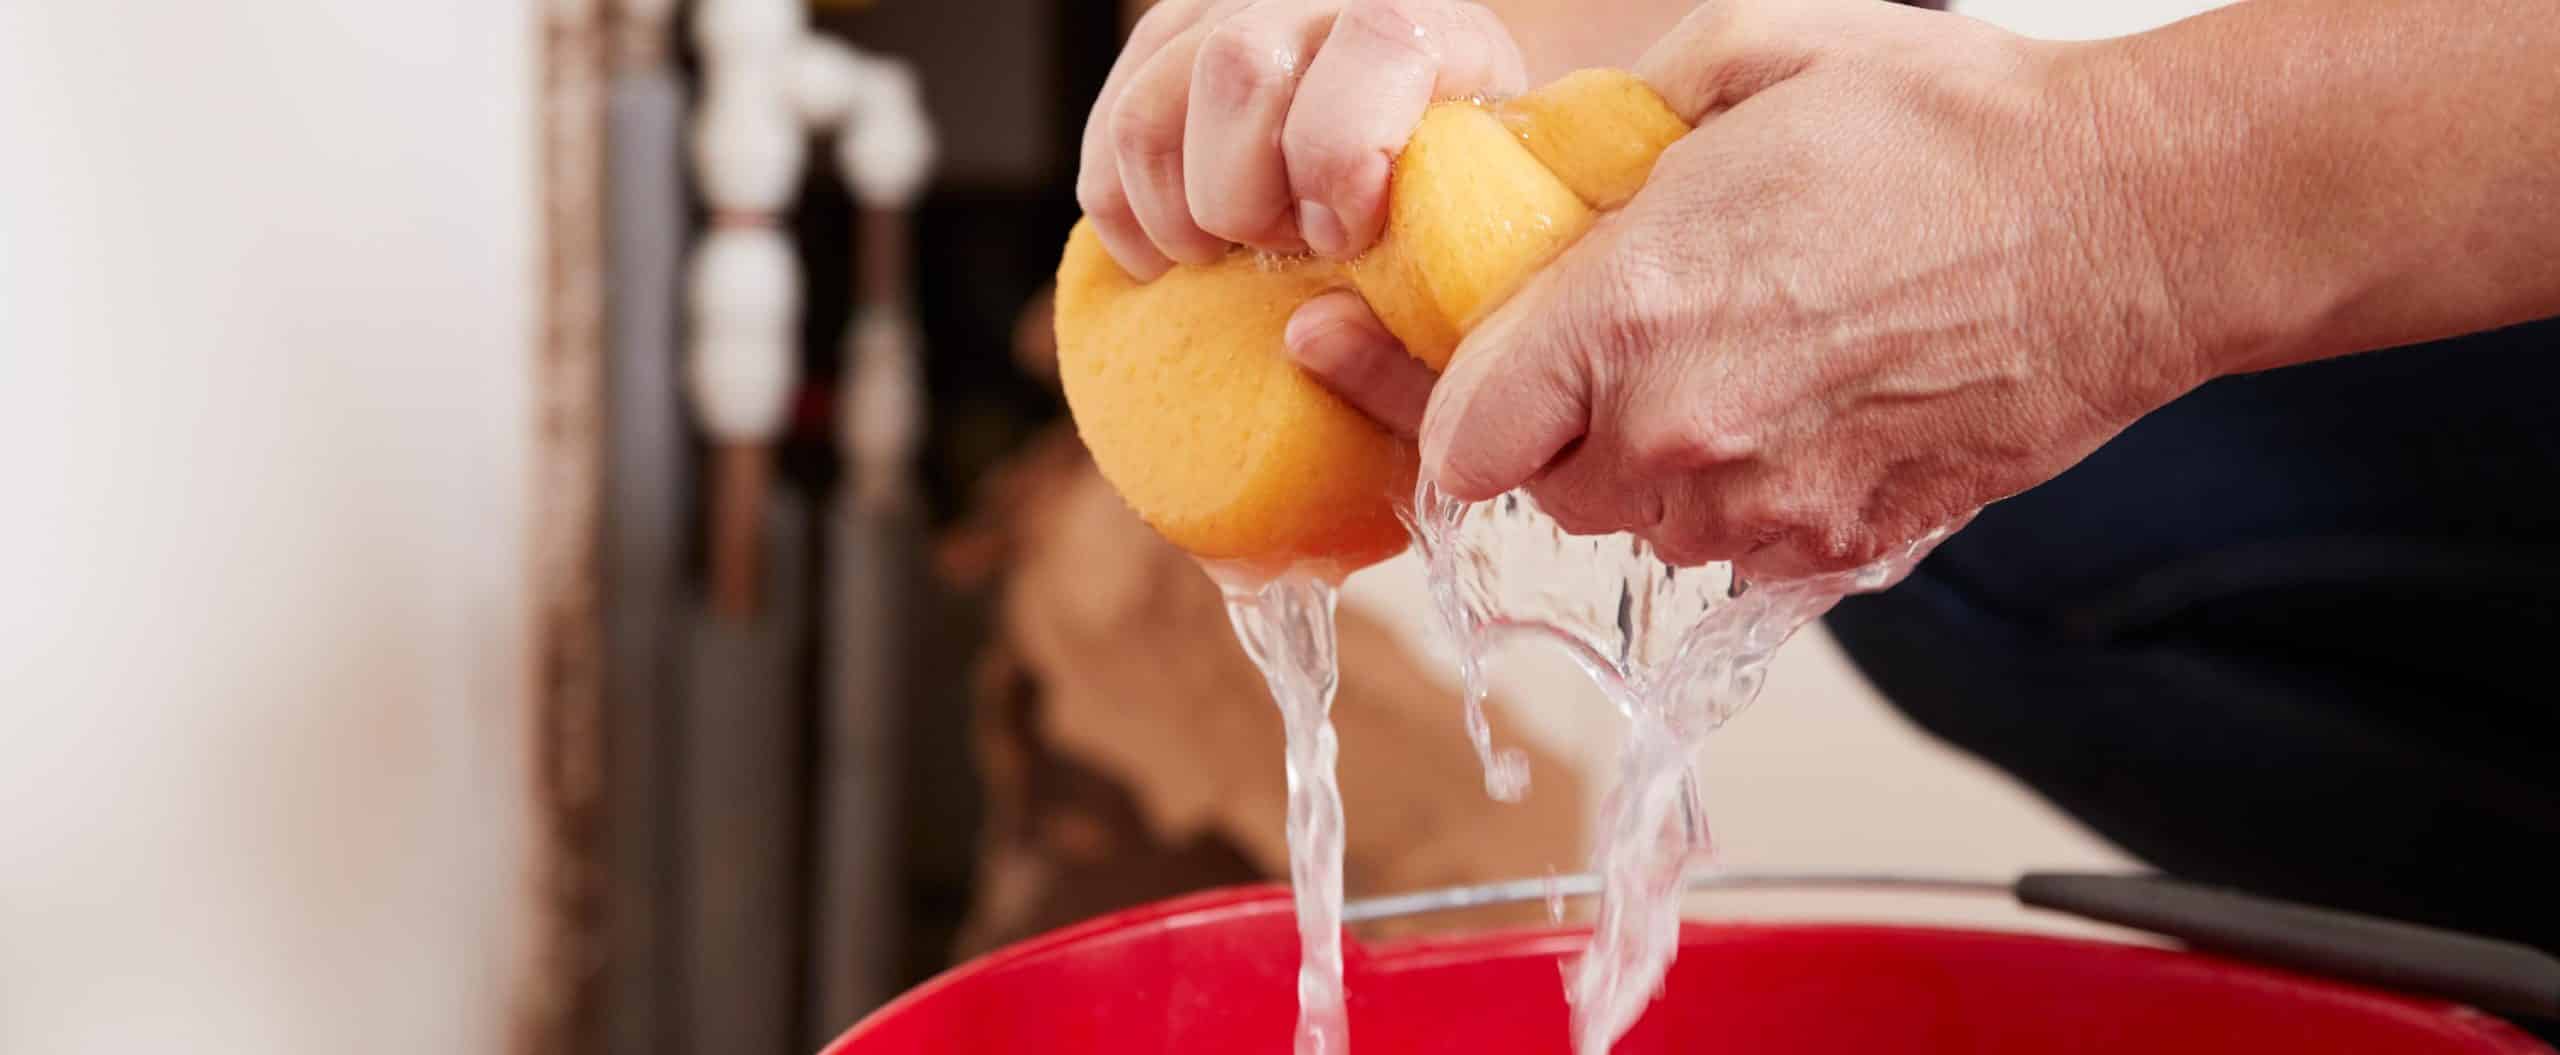 person ringing out a wet sponge over bucket